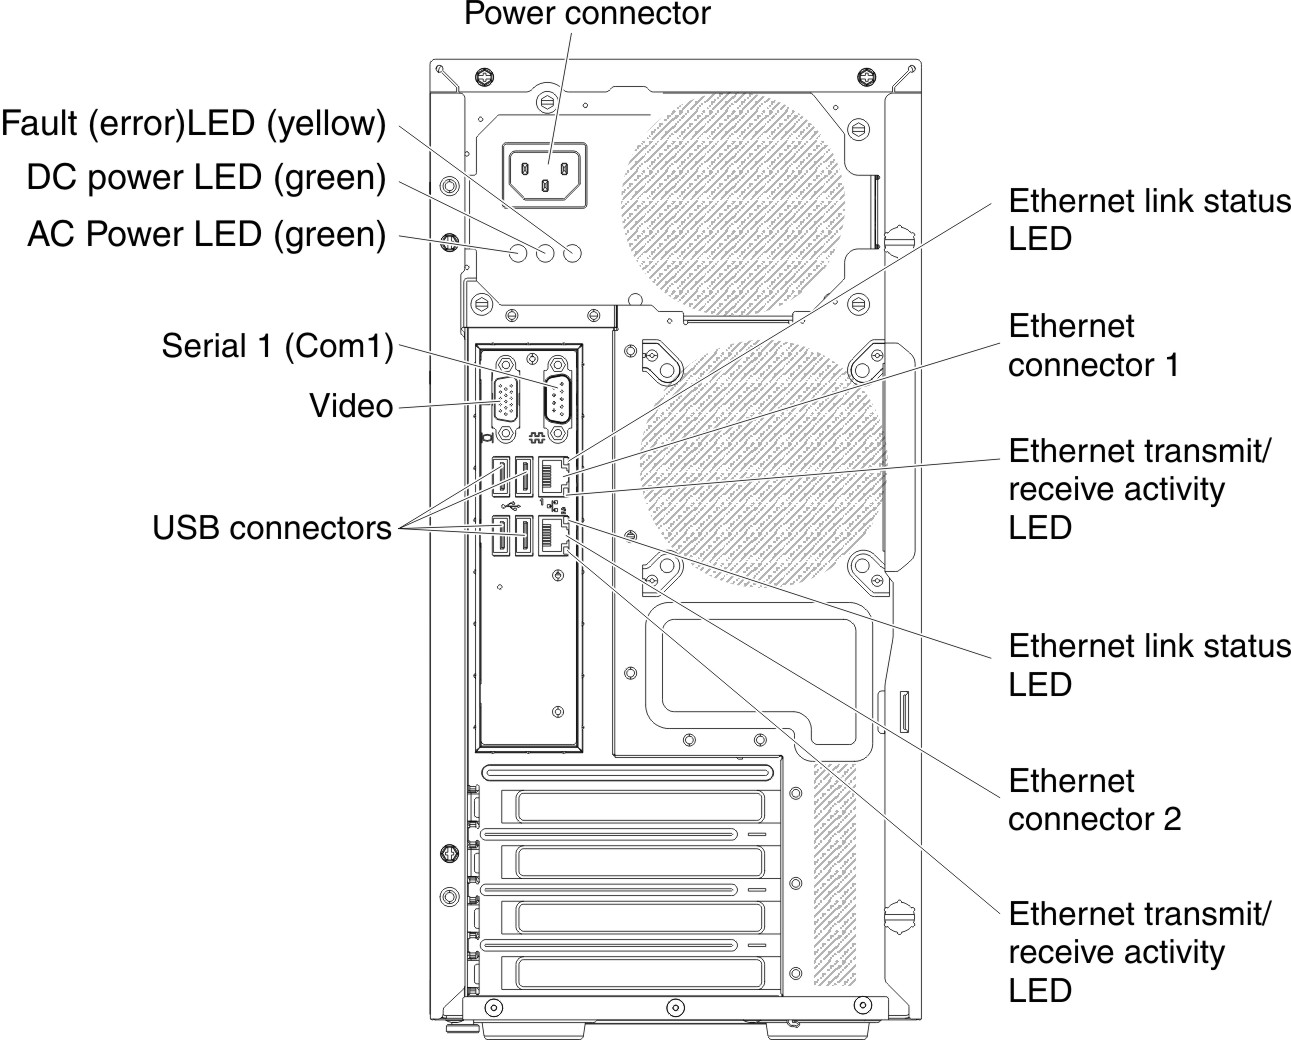 LEDs and connectors on the rear of the 4U server model with non-hot-swap power supplies (power supply LEDs present)